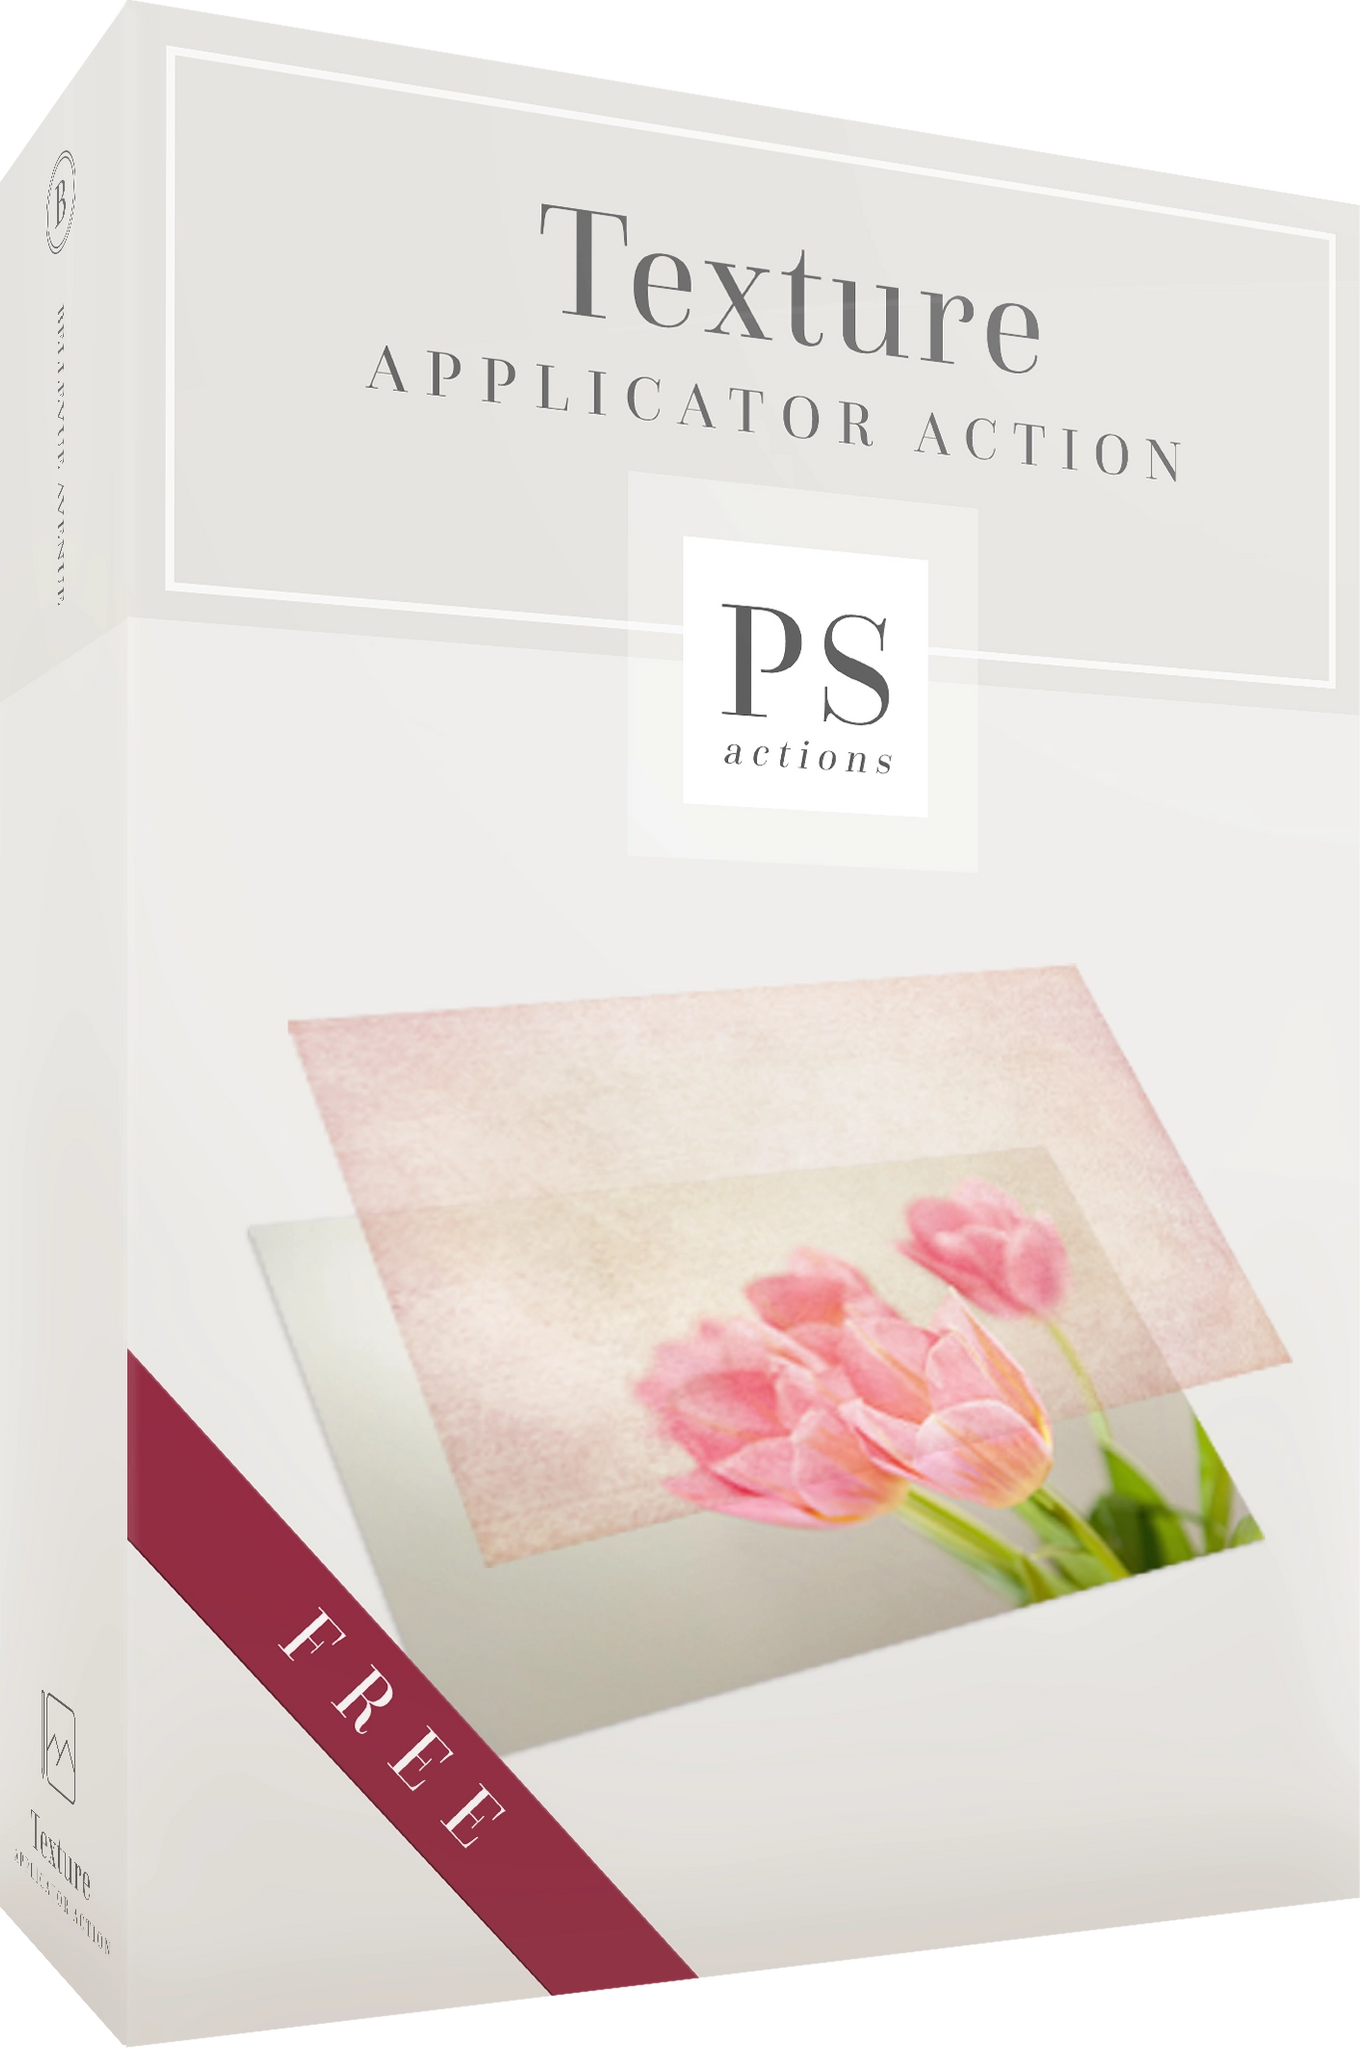 Free Texture Applicator Action for Photoshop and Photographers